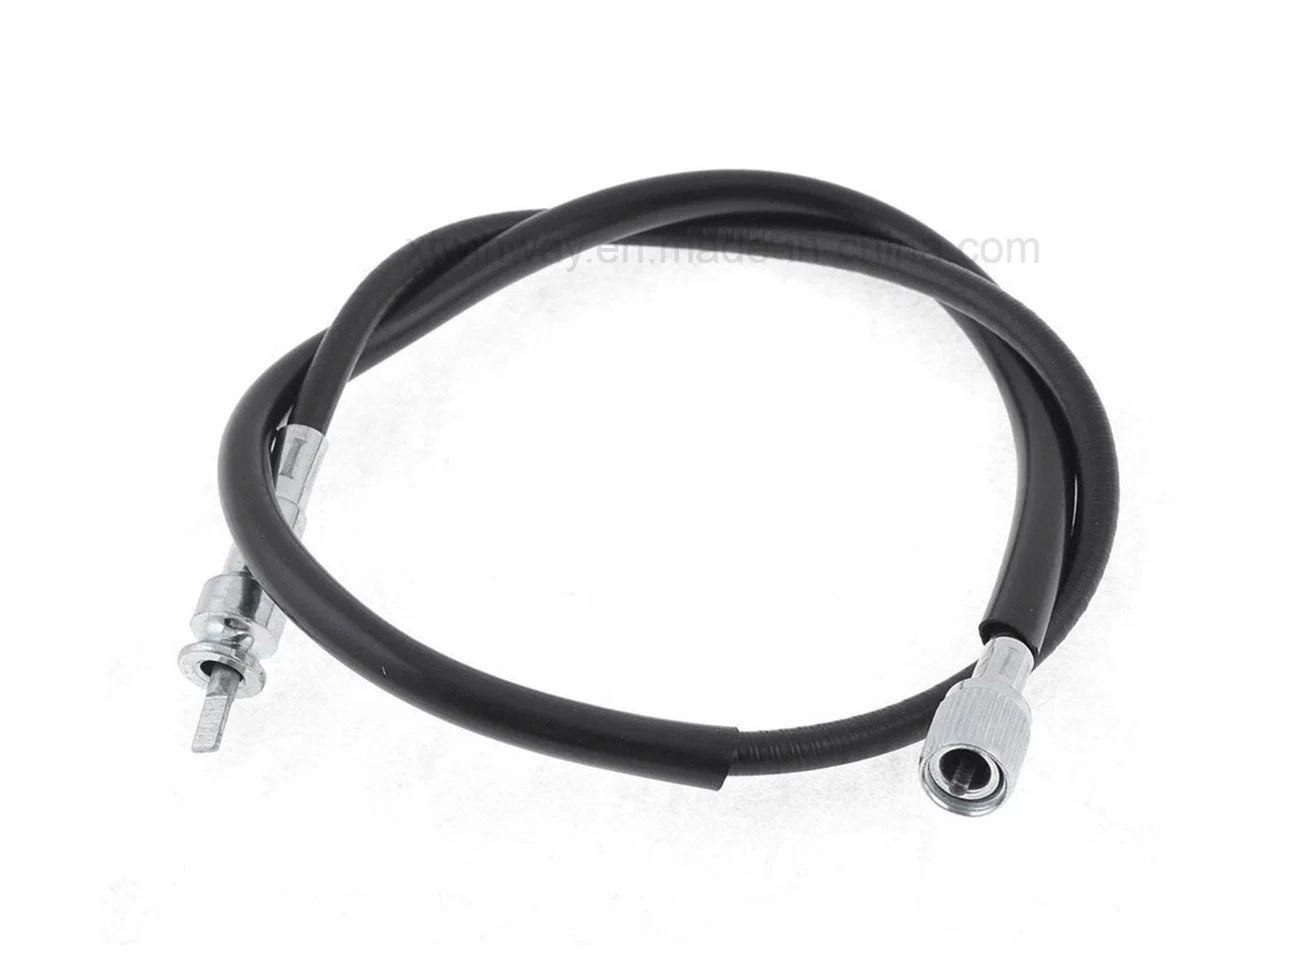 Cg125 Motorcycle Parts Black 31" Long Controller Tachometer Cable